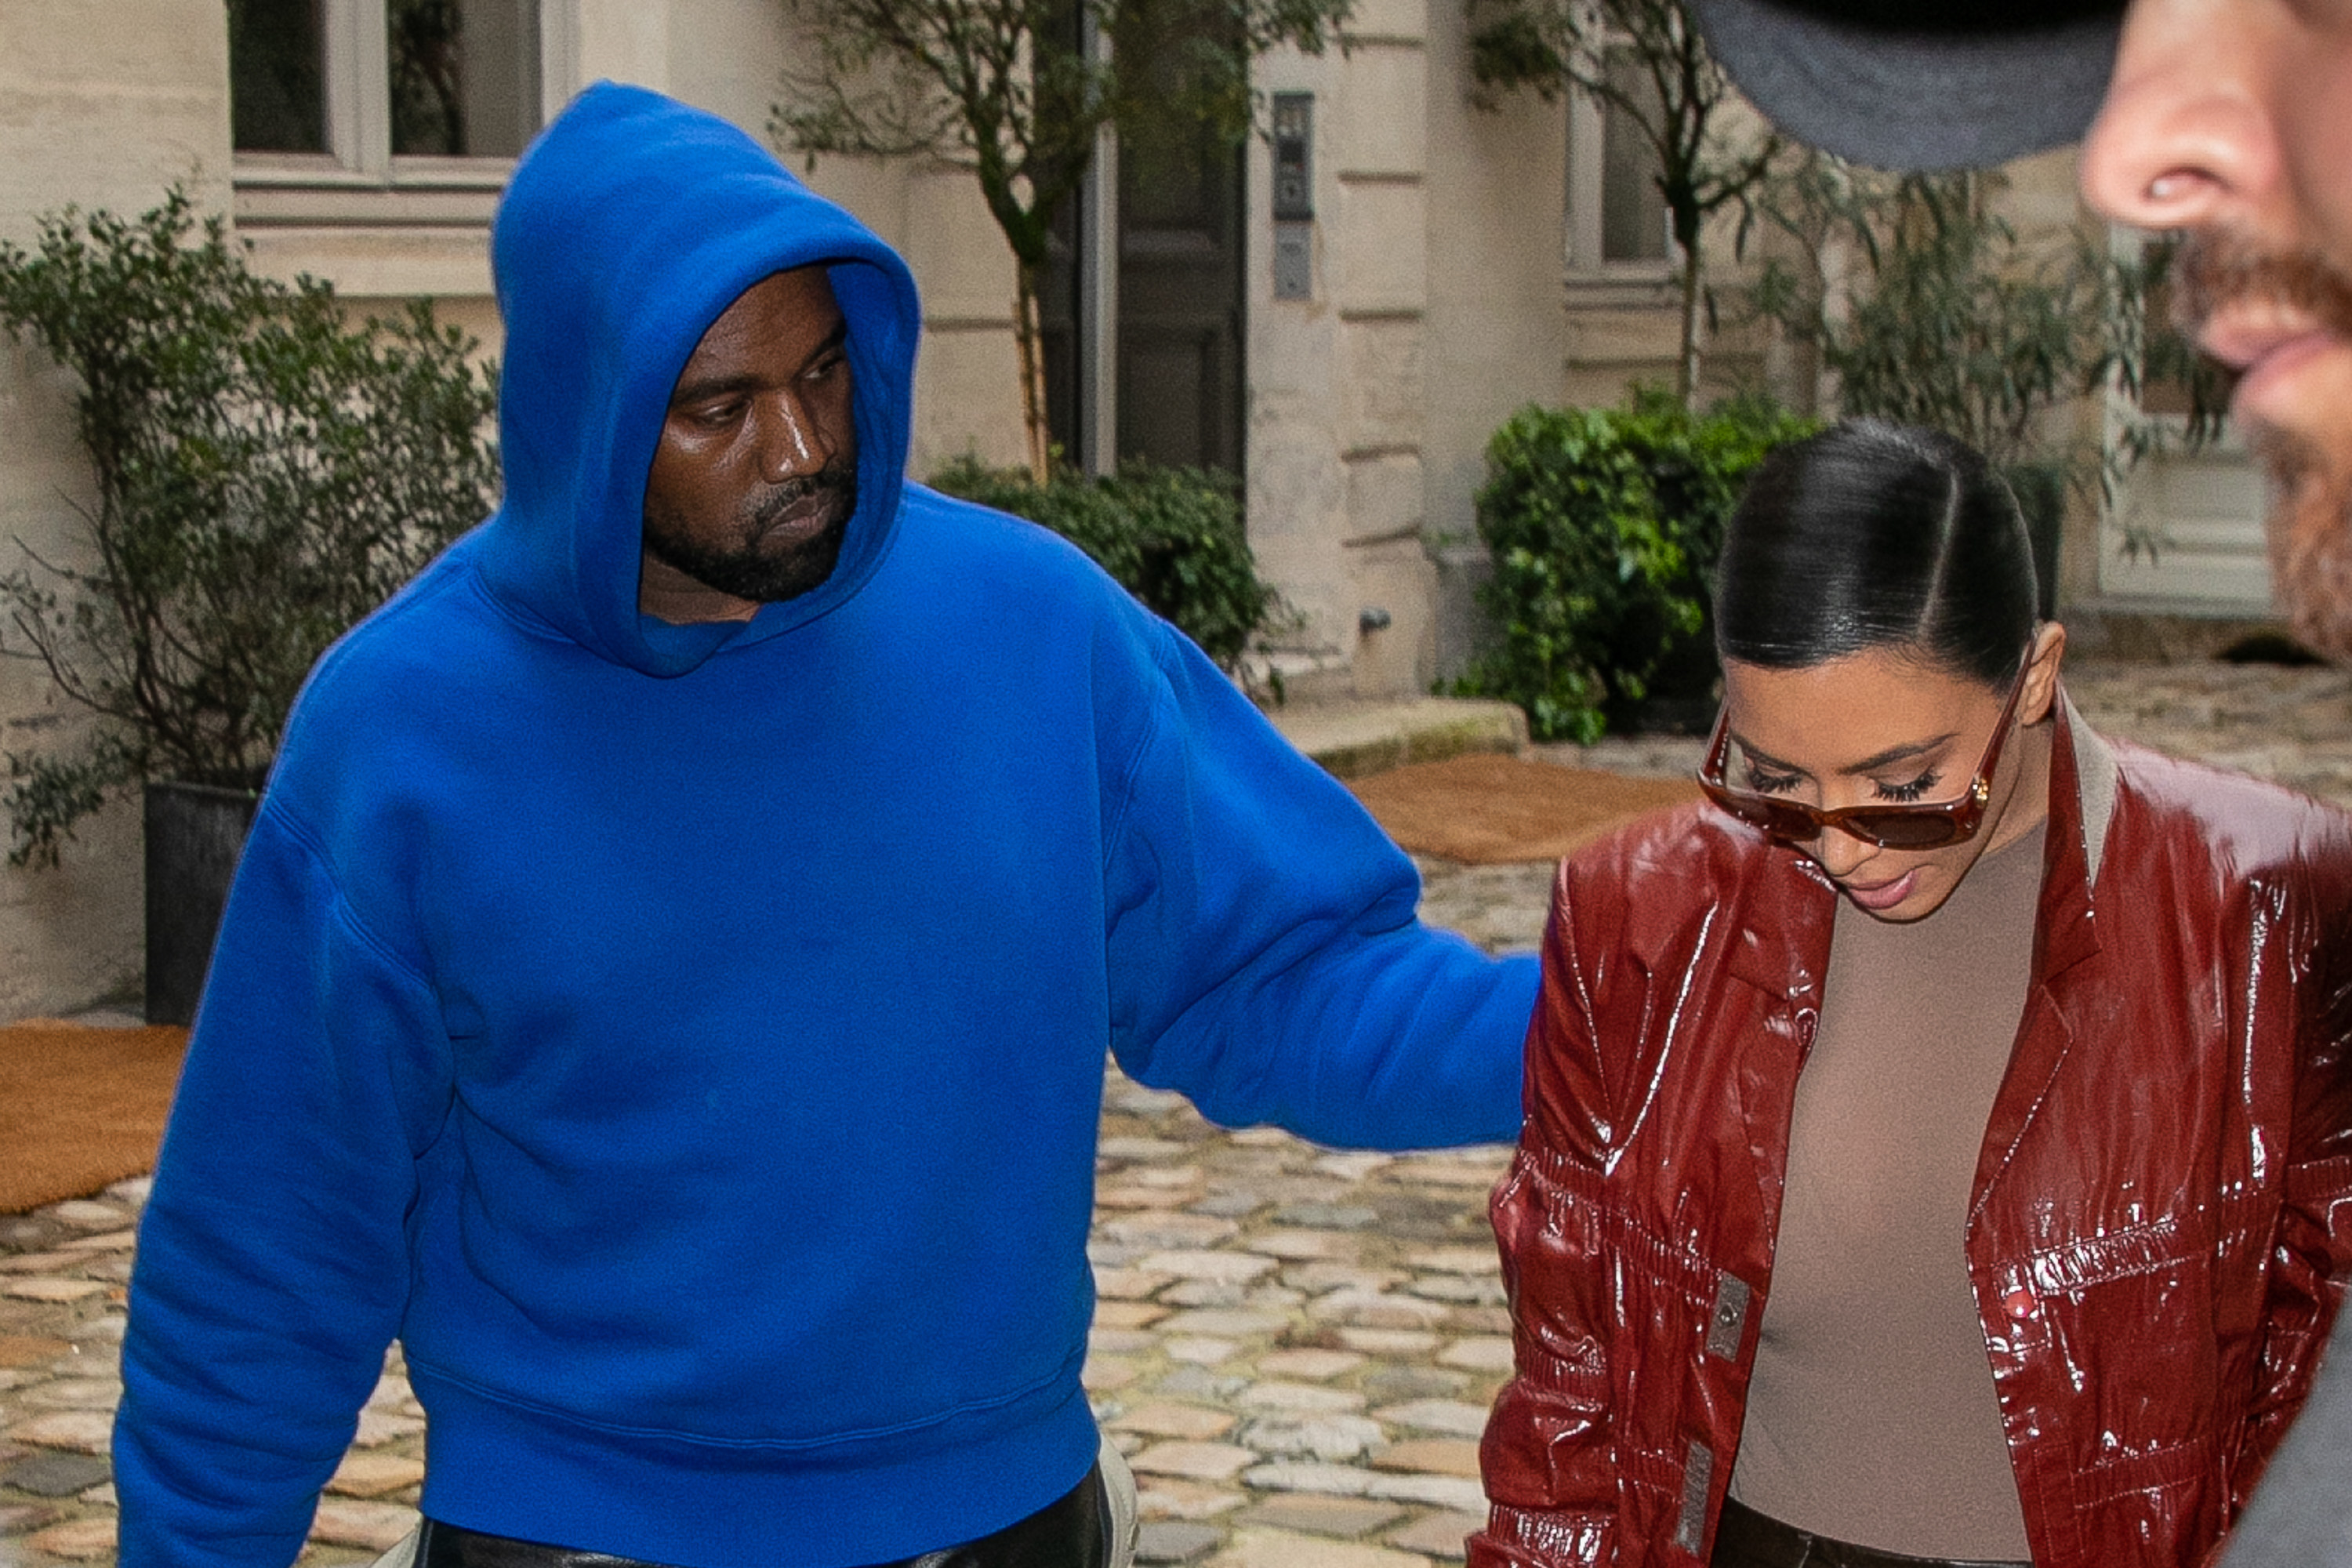 Kanye and Kim walk next to each other as he puts his hand on her shoulder